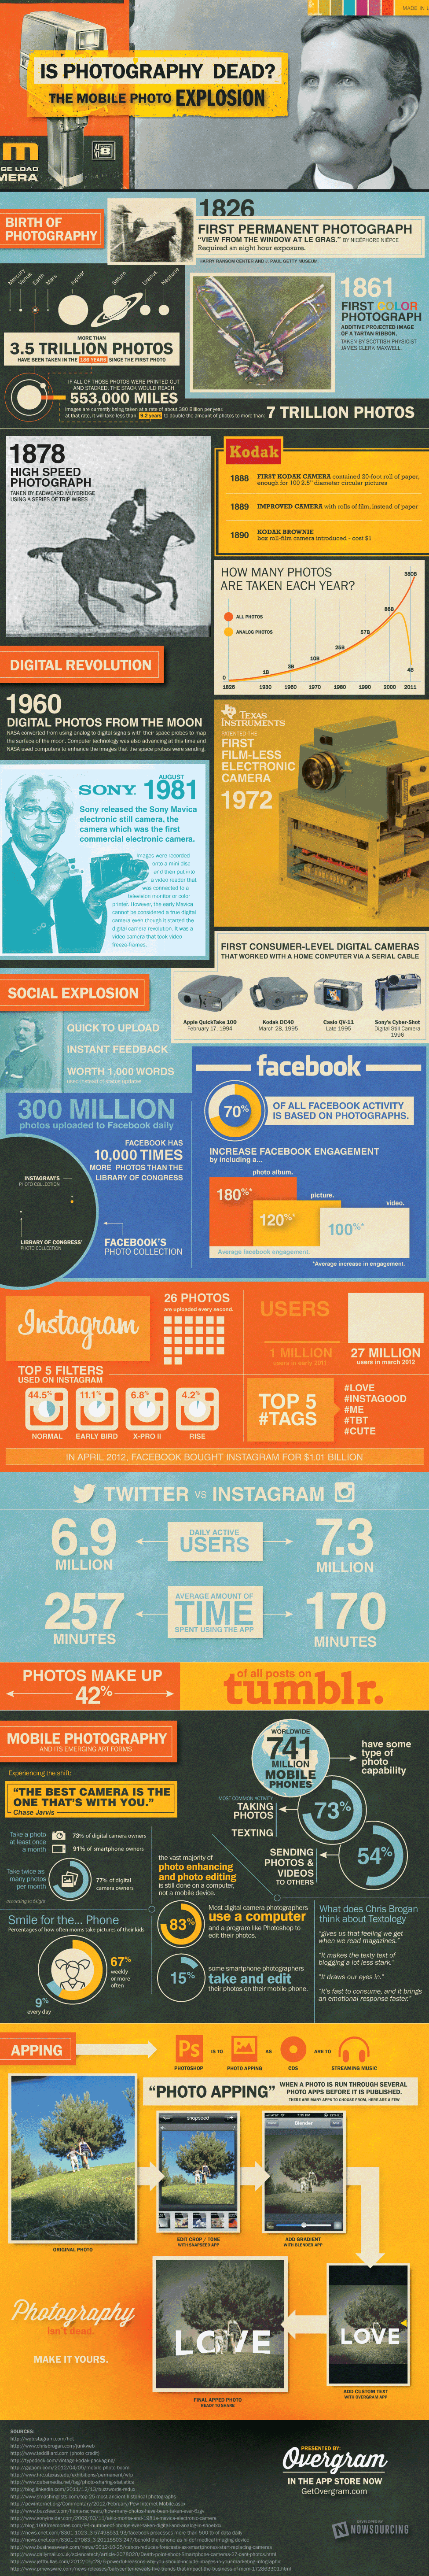 mobile-photography-history-statistics-infographic